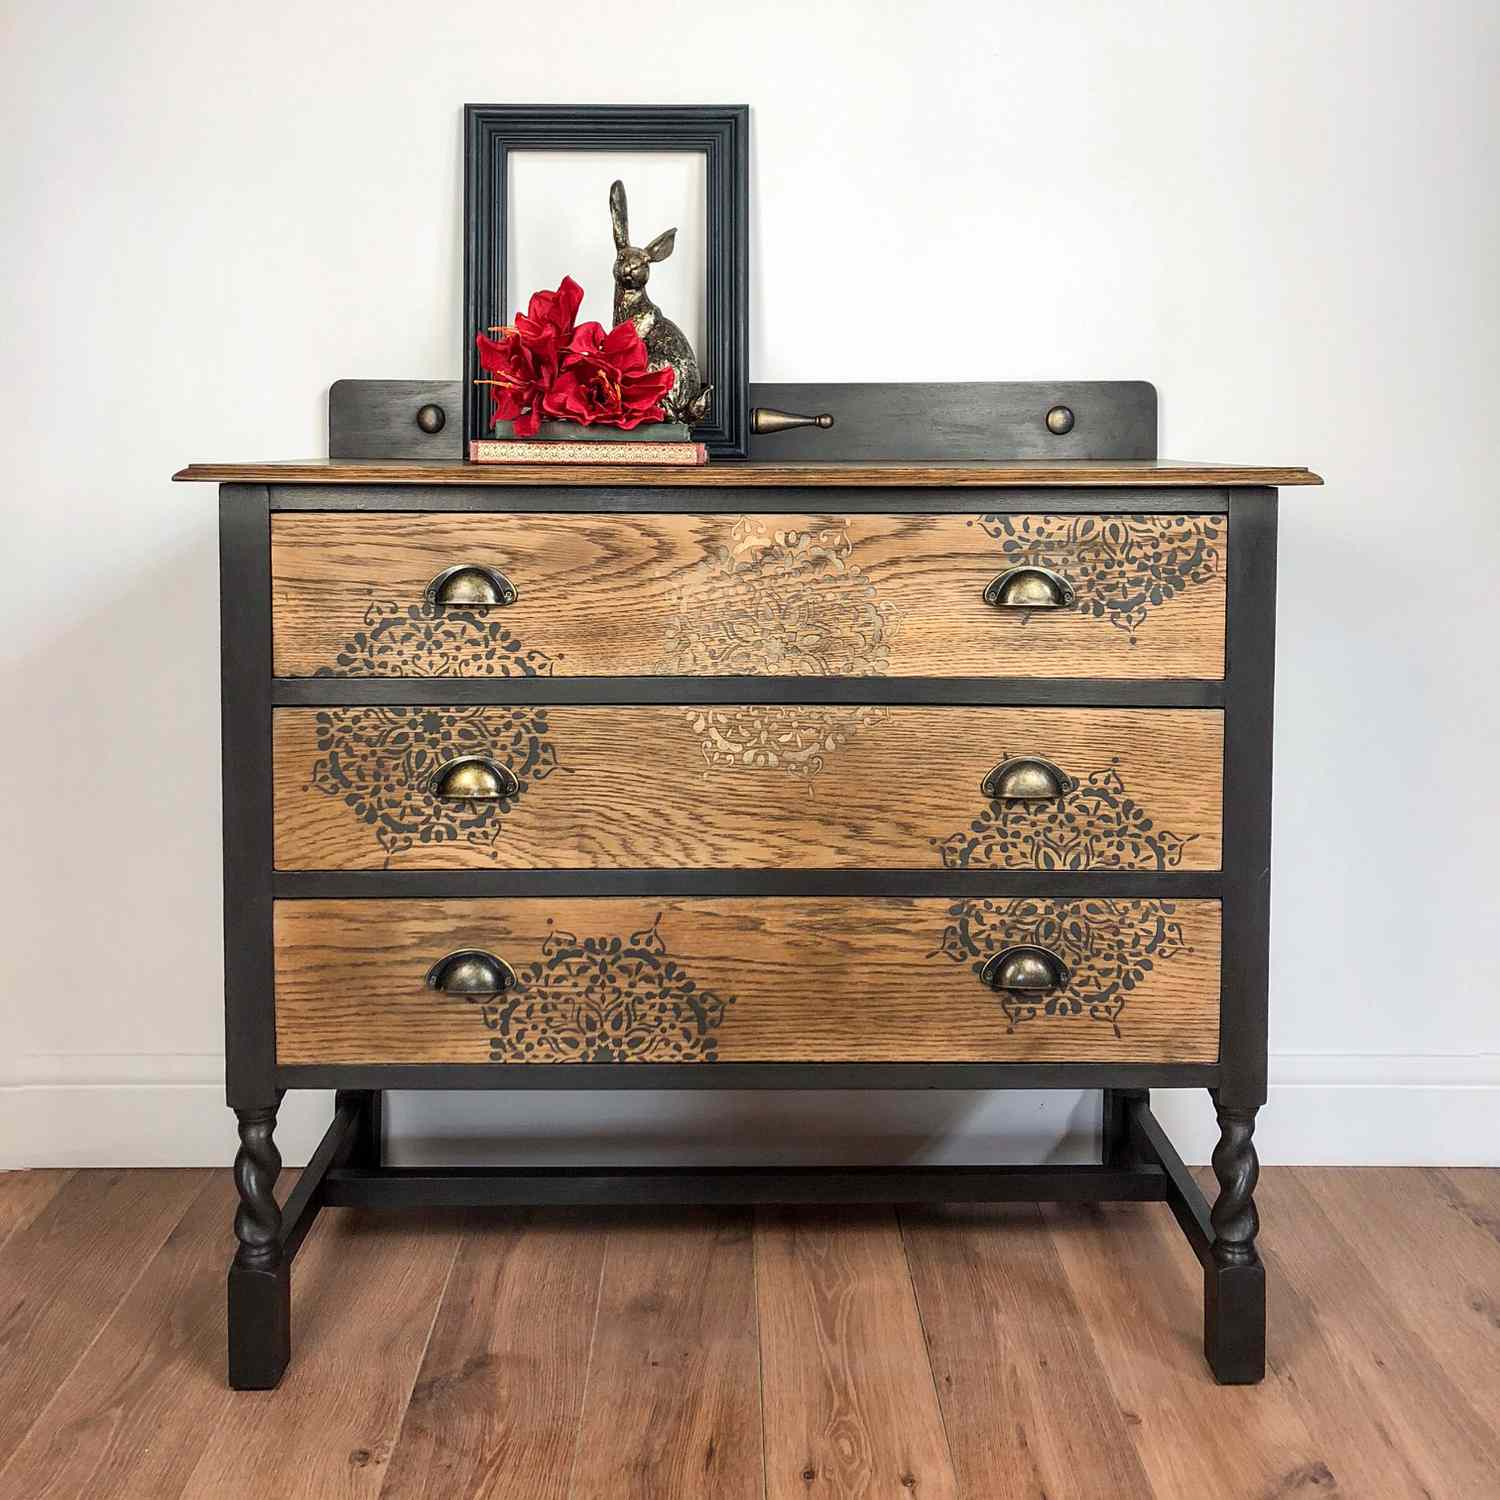 Upcycled drawers by Claire Manton